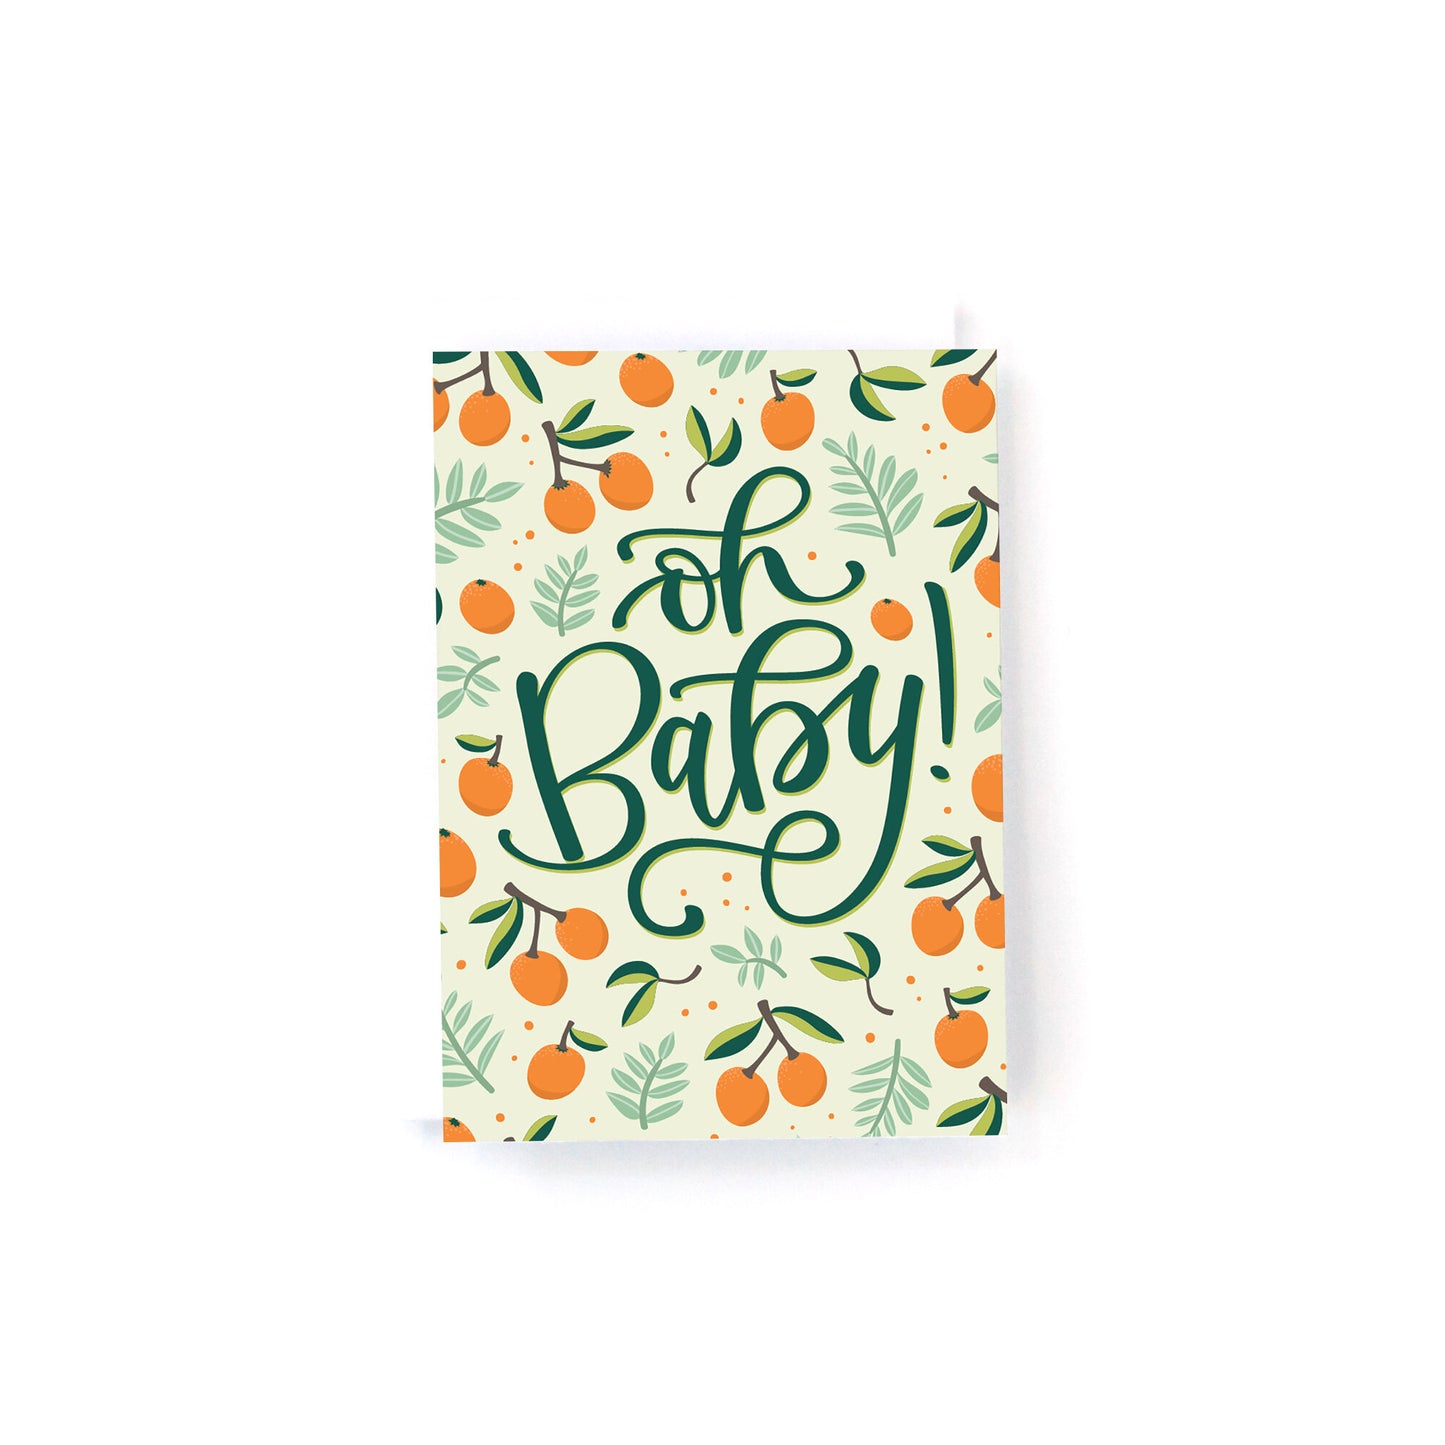 Gender Neutral new Baby card featuring greenery and orange branches surrounding the text, Oh Baby.